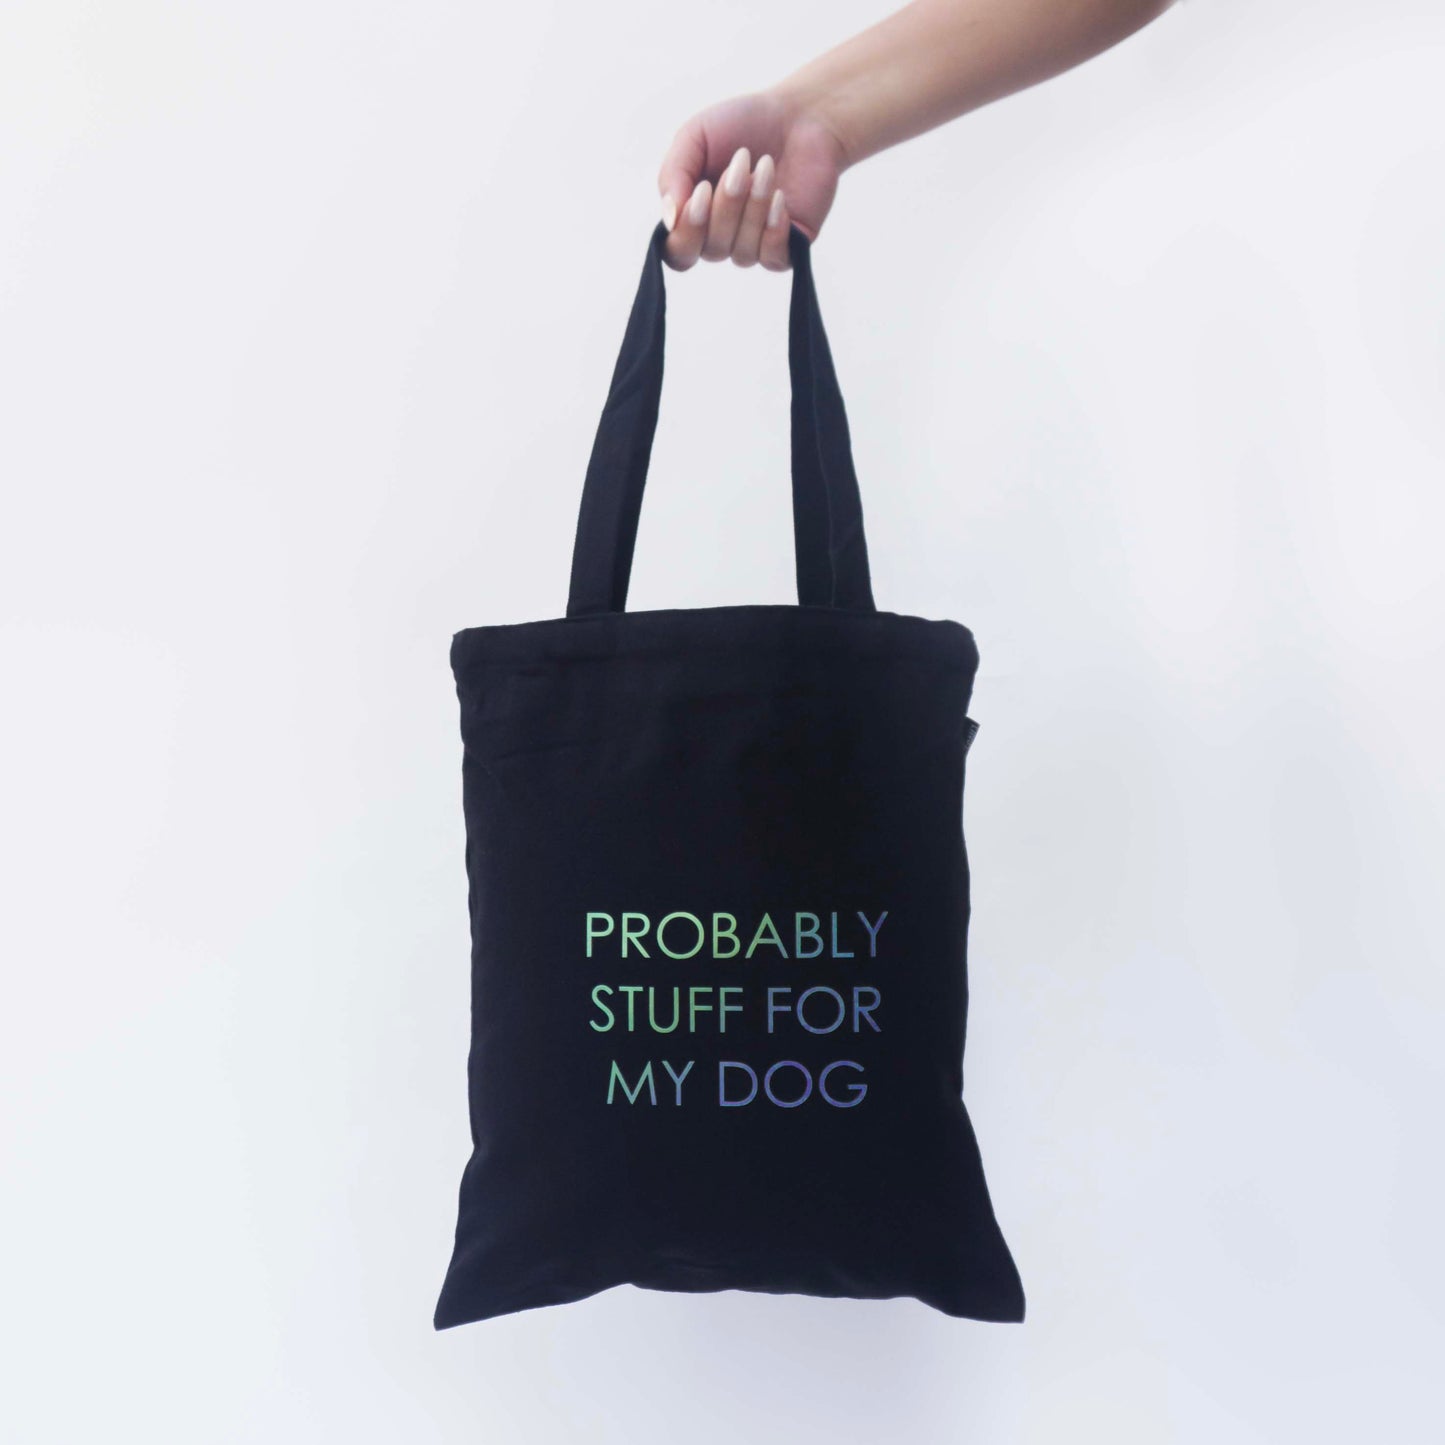 "Probably Stuff For My Dog" Black Tote Bag